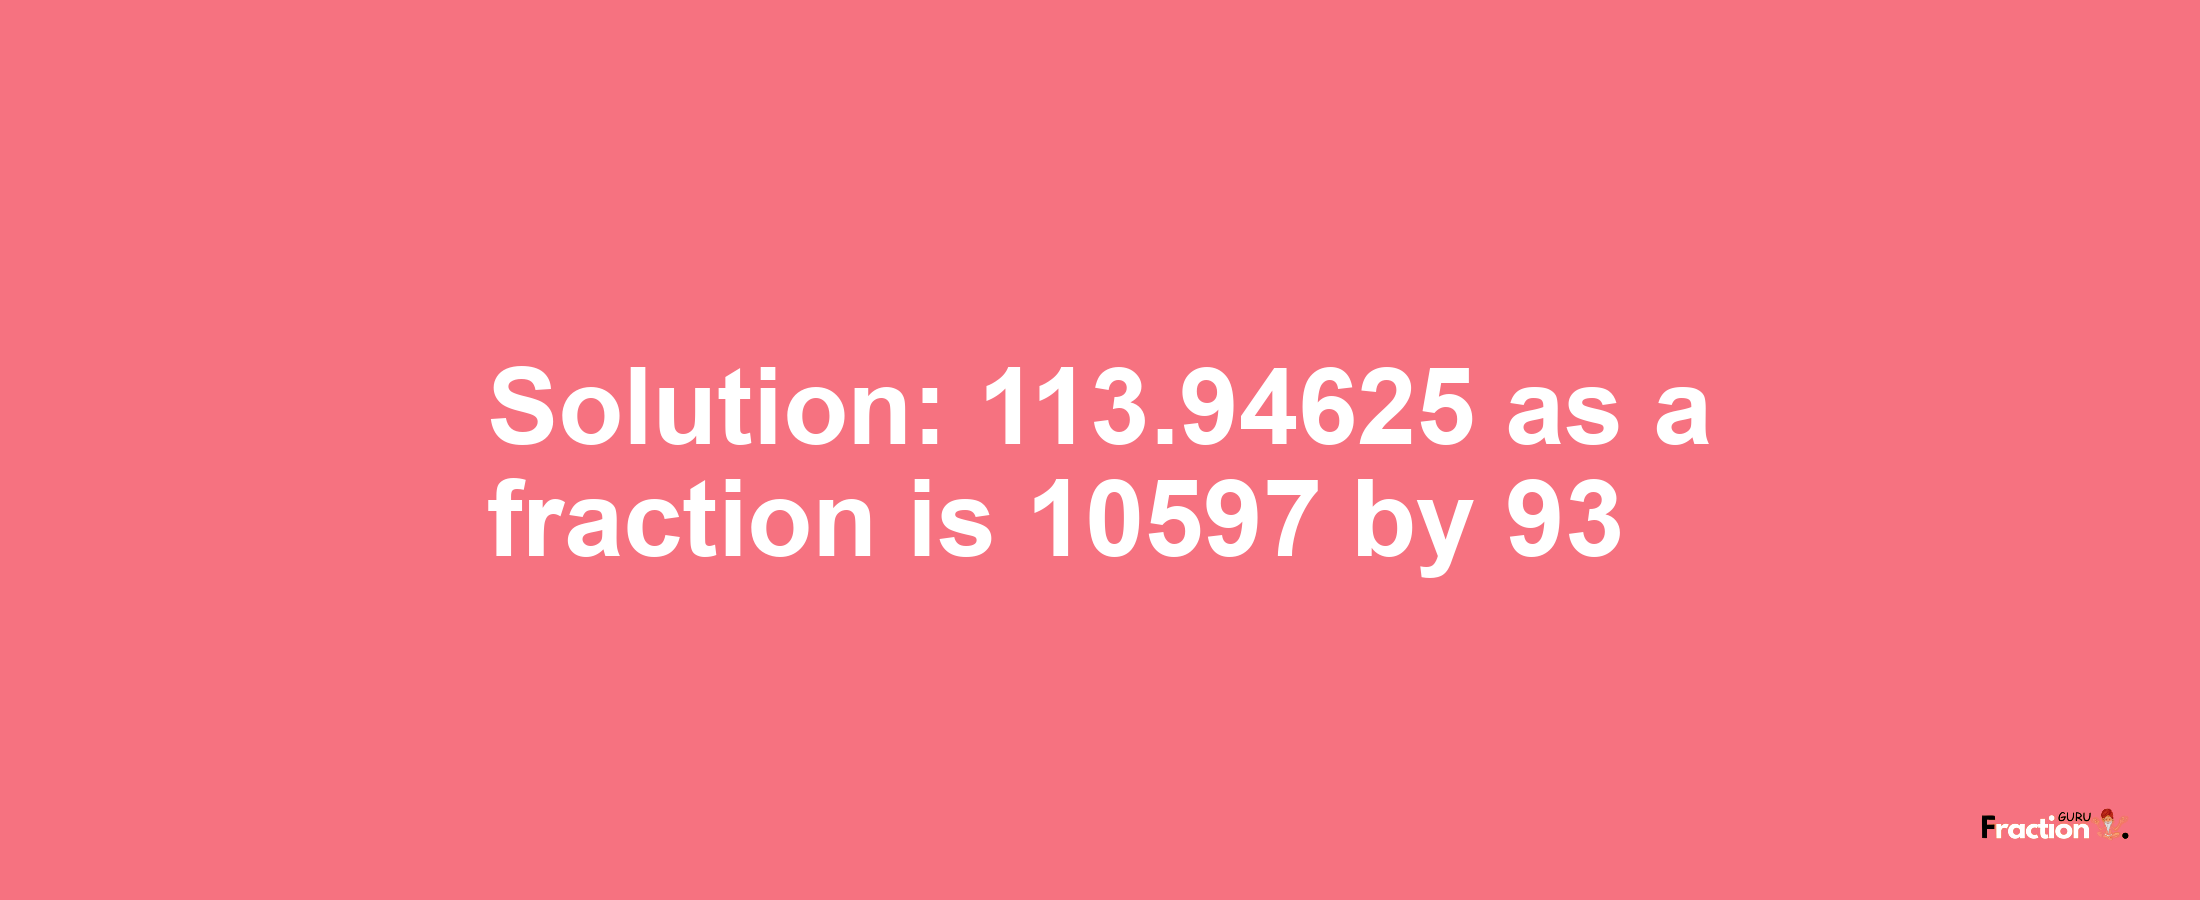 Solution:113.94625 as a fraction is 10597/93